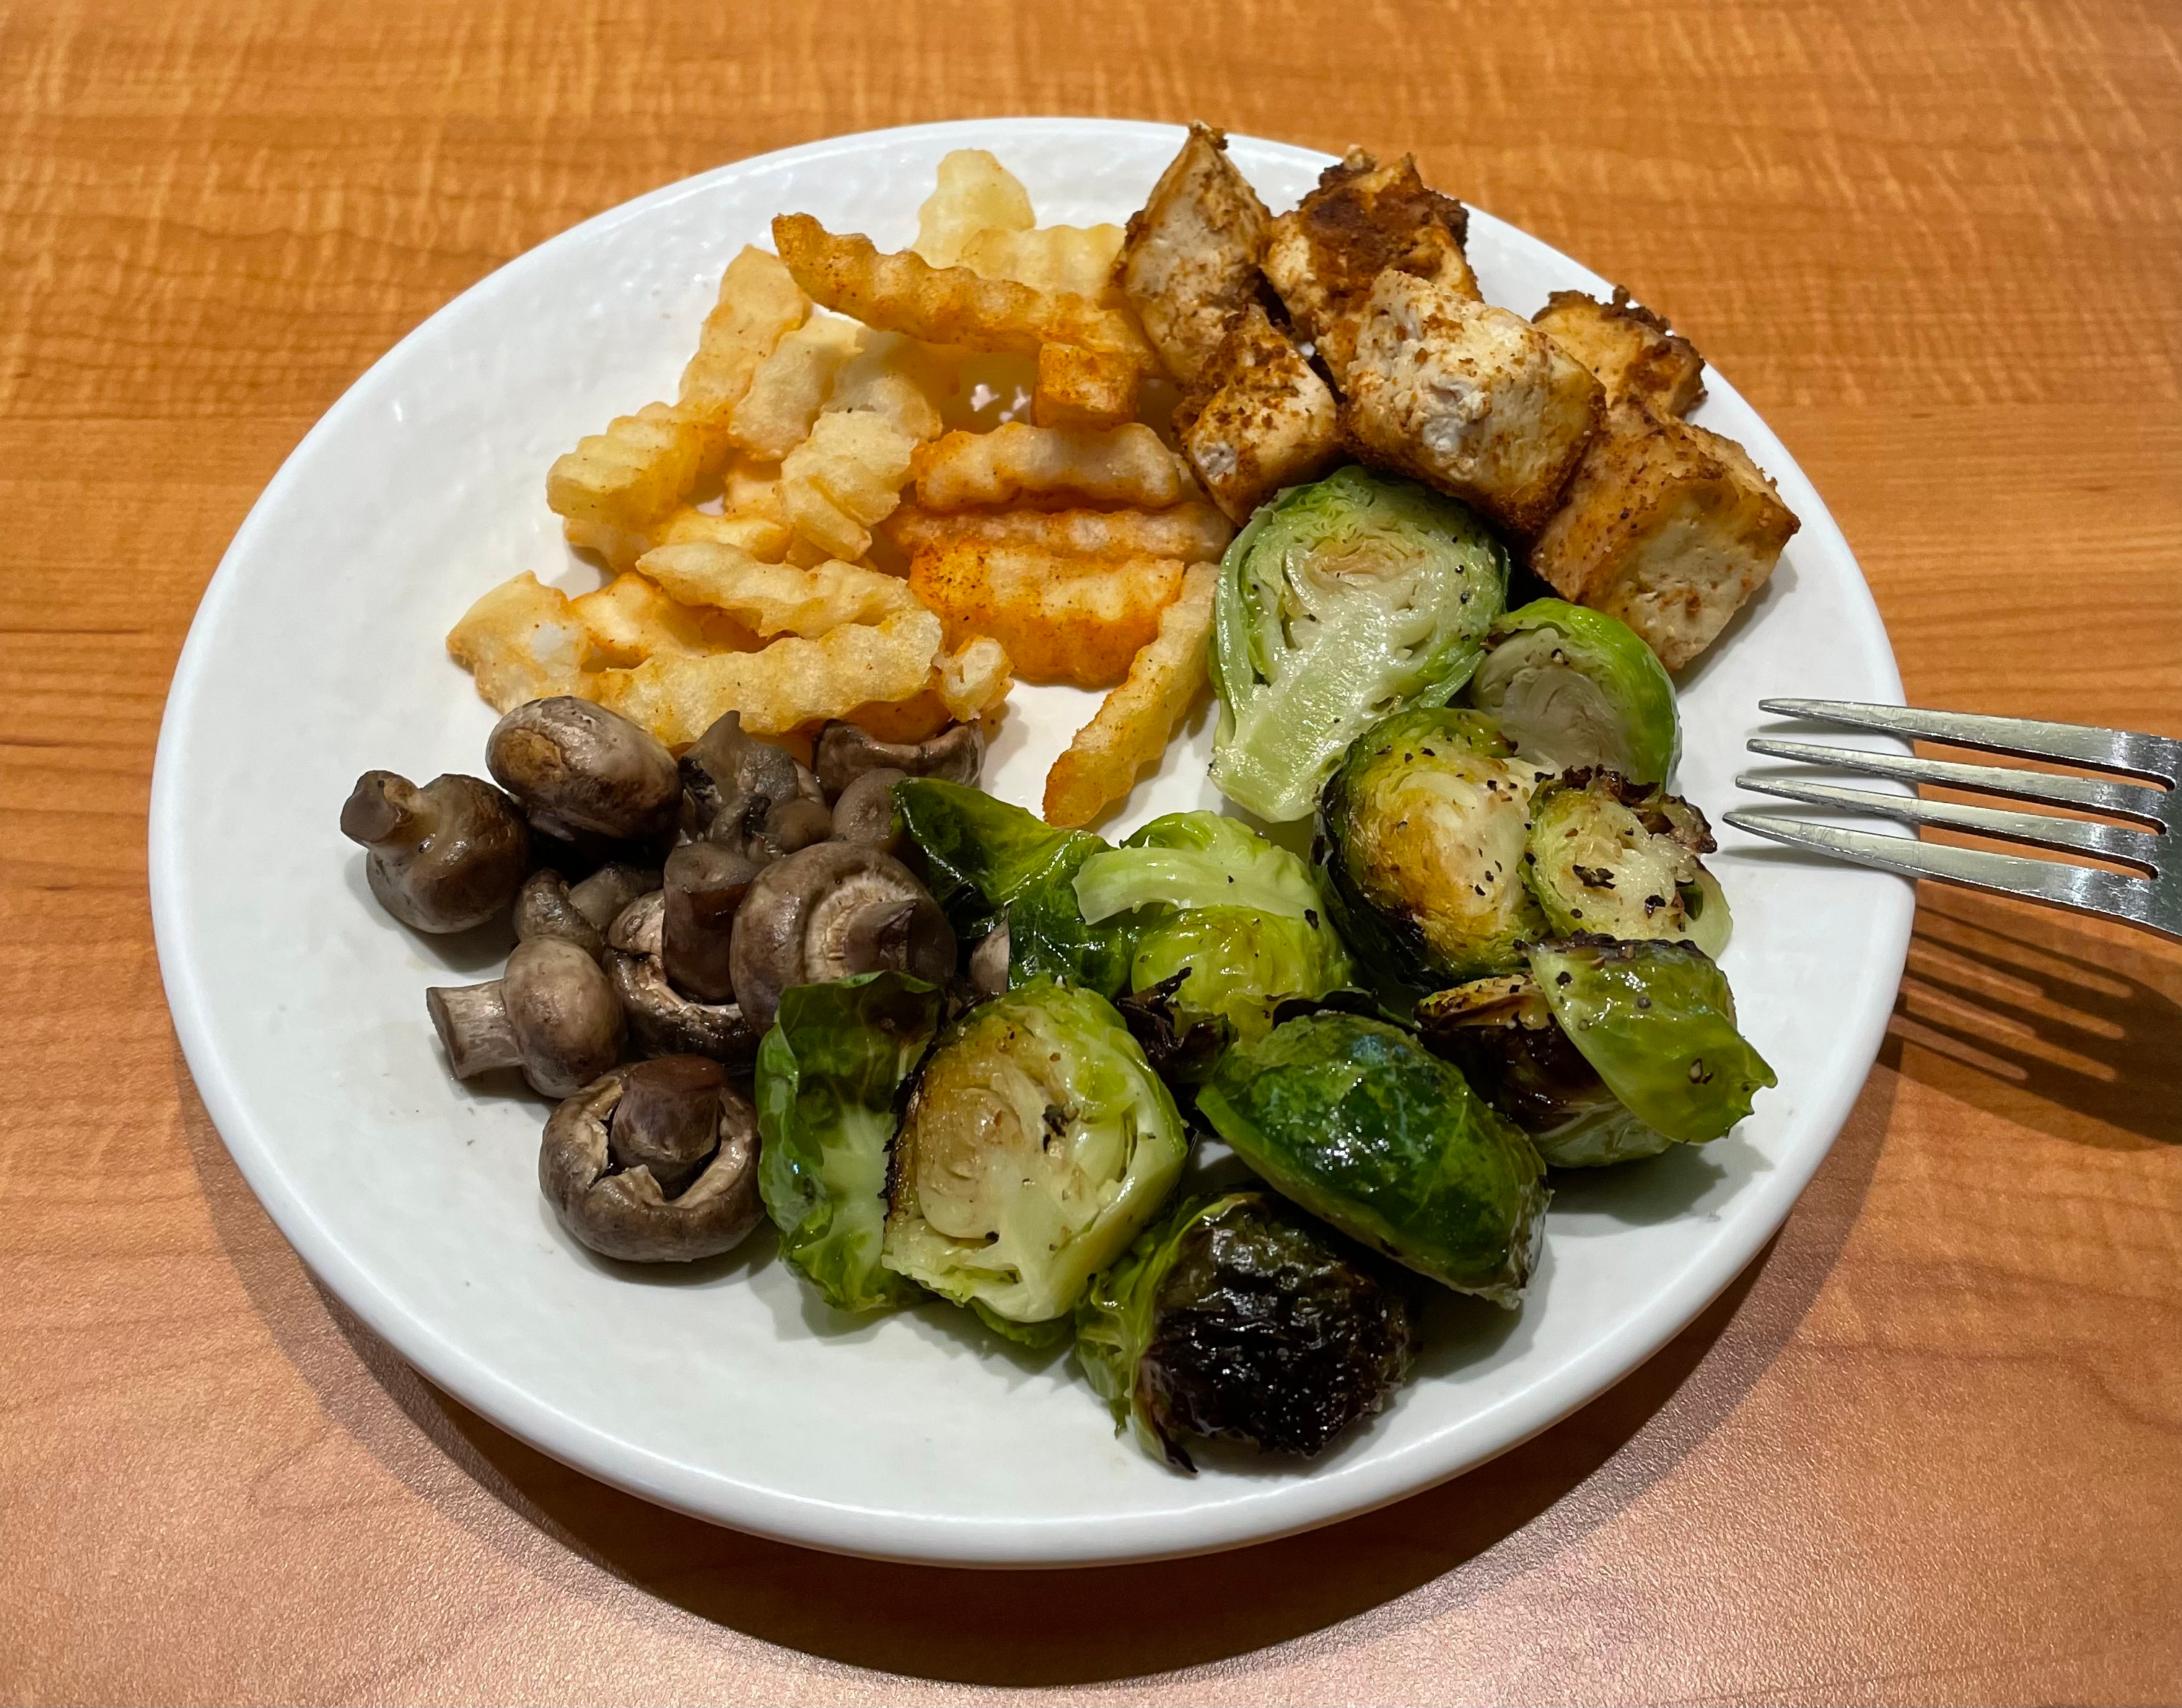 Brussel sprouts, fries, mushrooms, and tofu